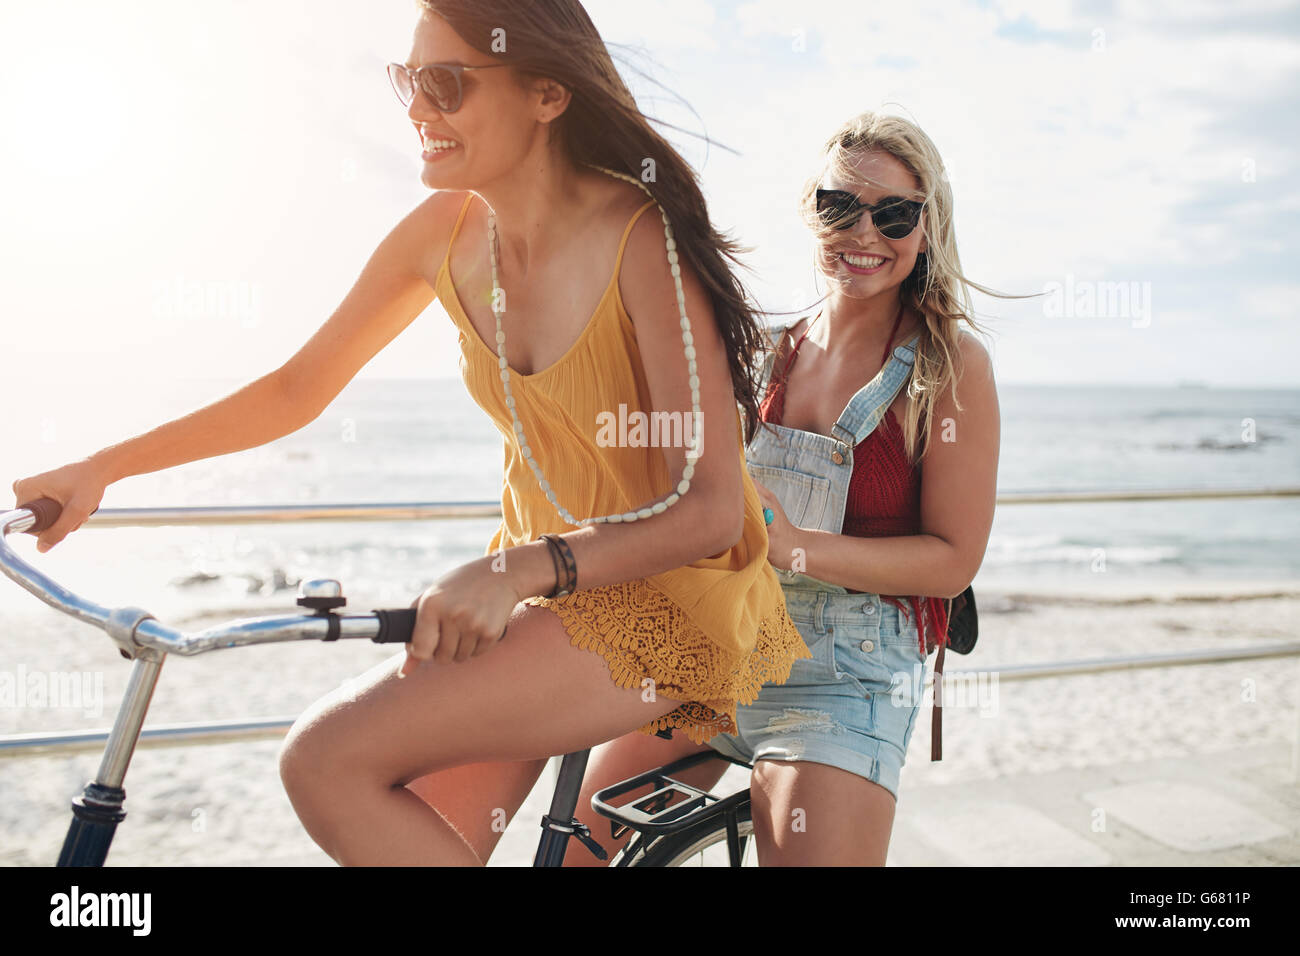 Two stylish young female friends riding together on a bicycle along seaside. Best friends enjoying a day on bike. Stock Photo